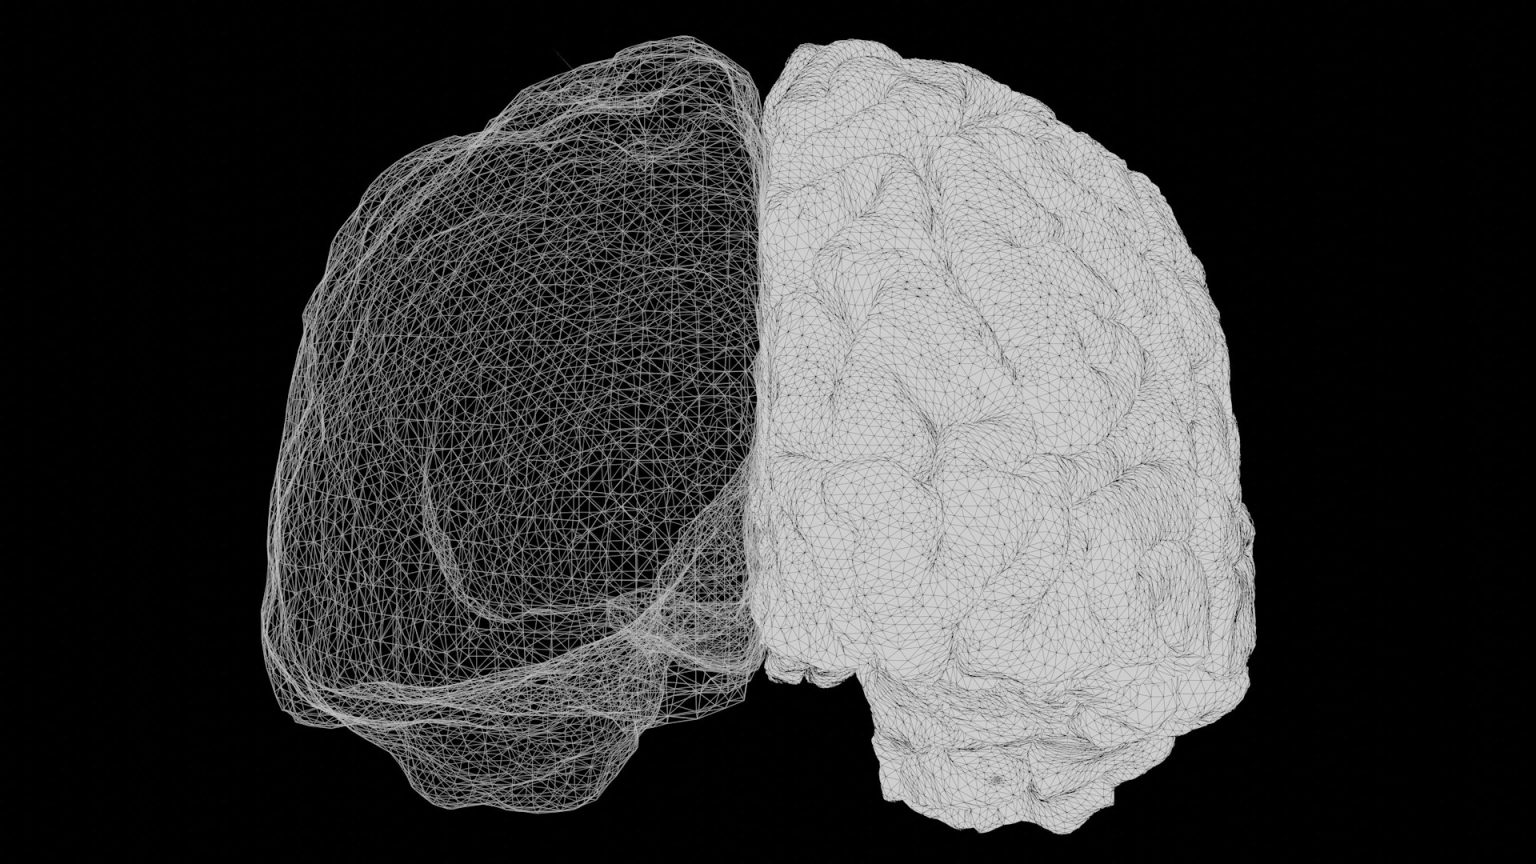 Black and white wireframe rendering of a human brain, with the left hemisphere shown in sparse lines and the right hemisphere rendered more densely detailed, highlighting areas associated with cognition.